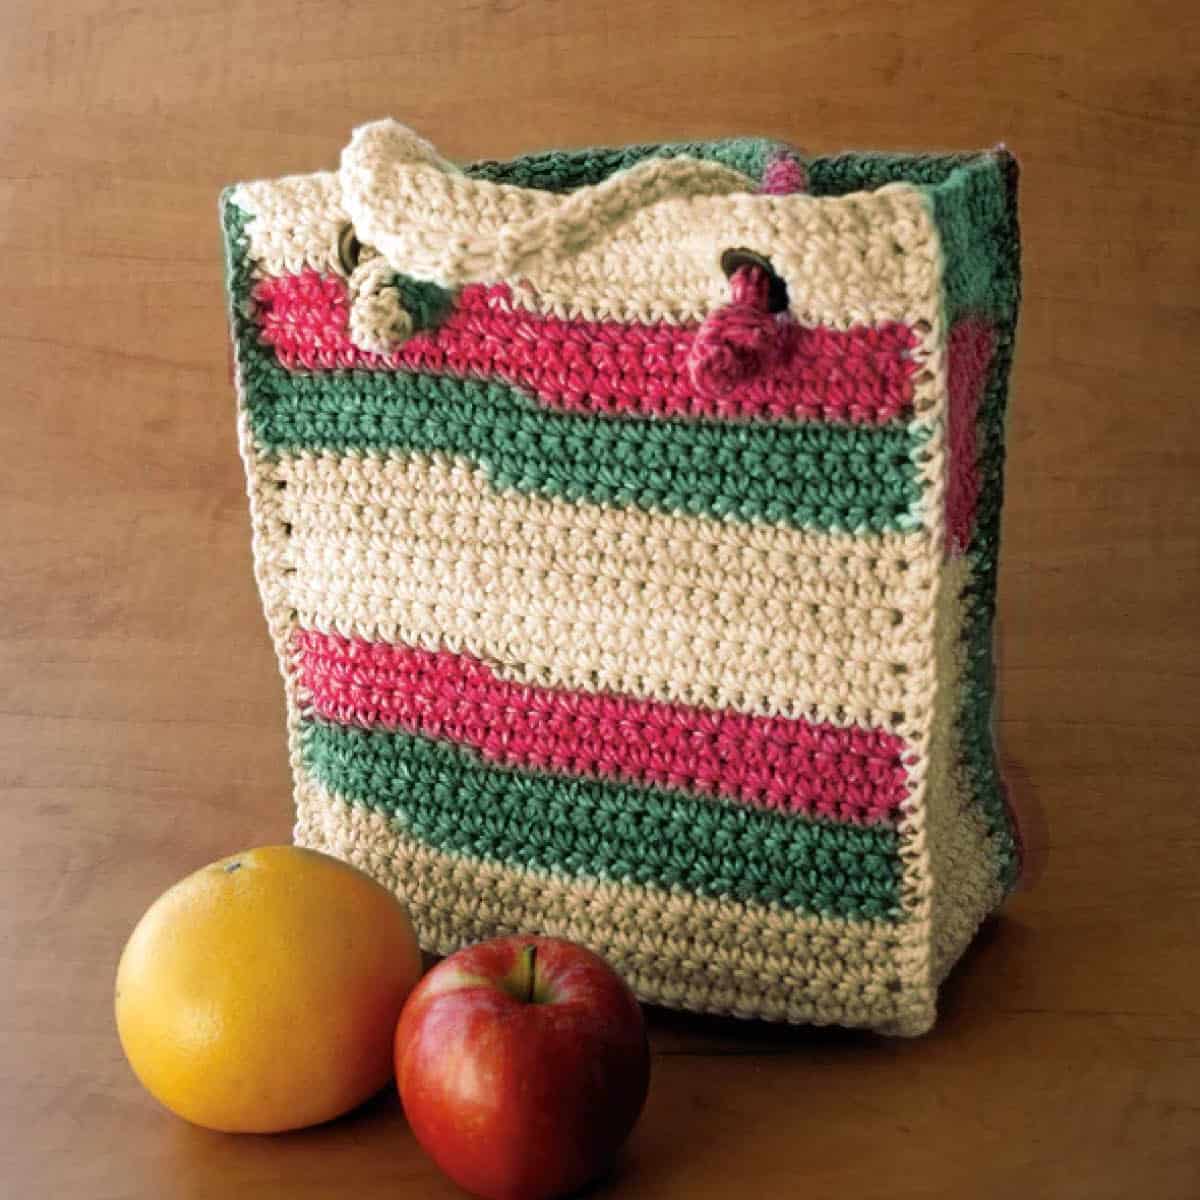 Crochet Lunch and To Go Bags